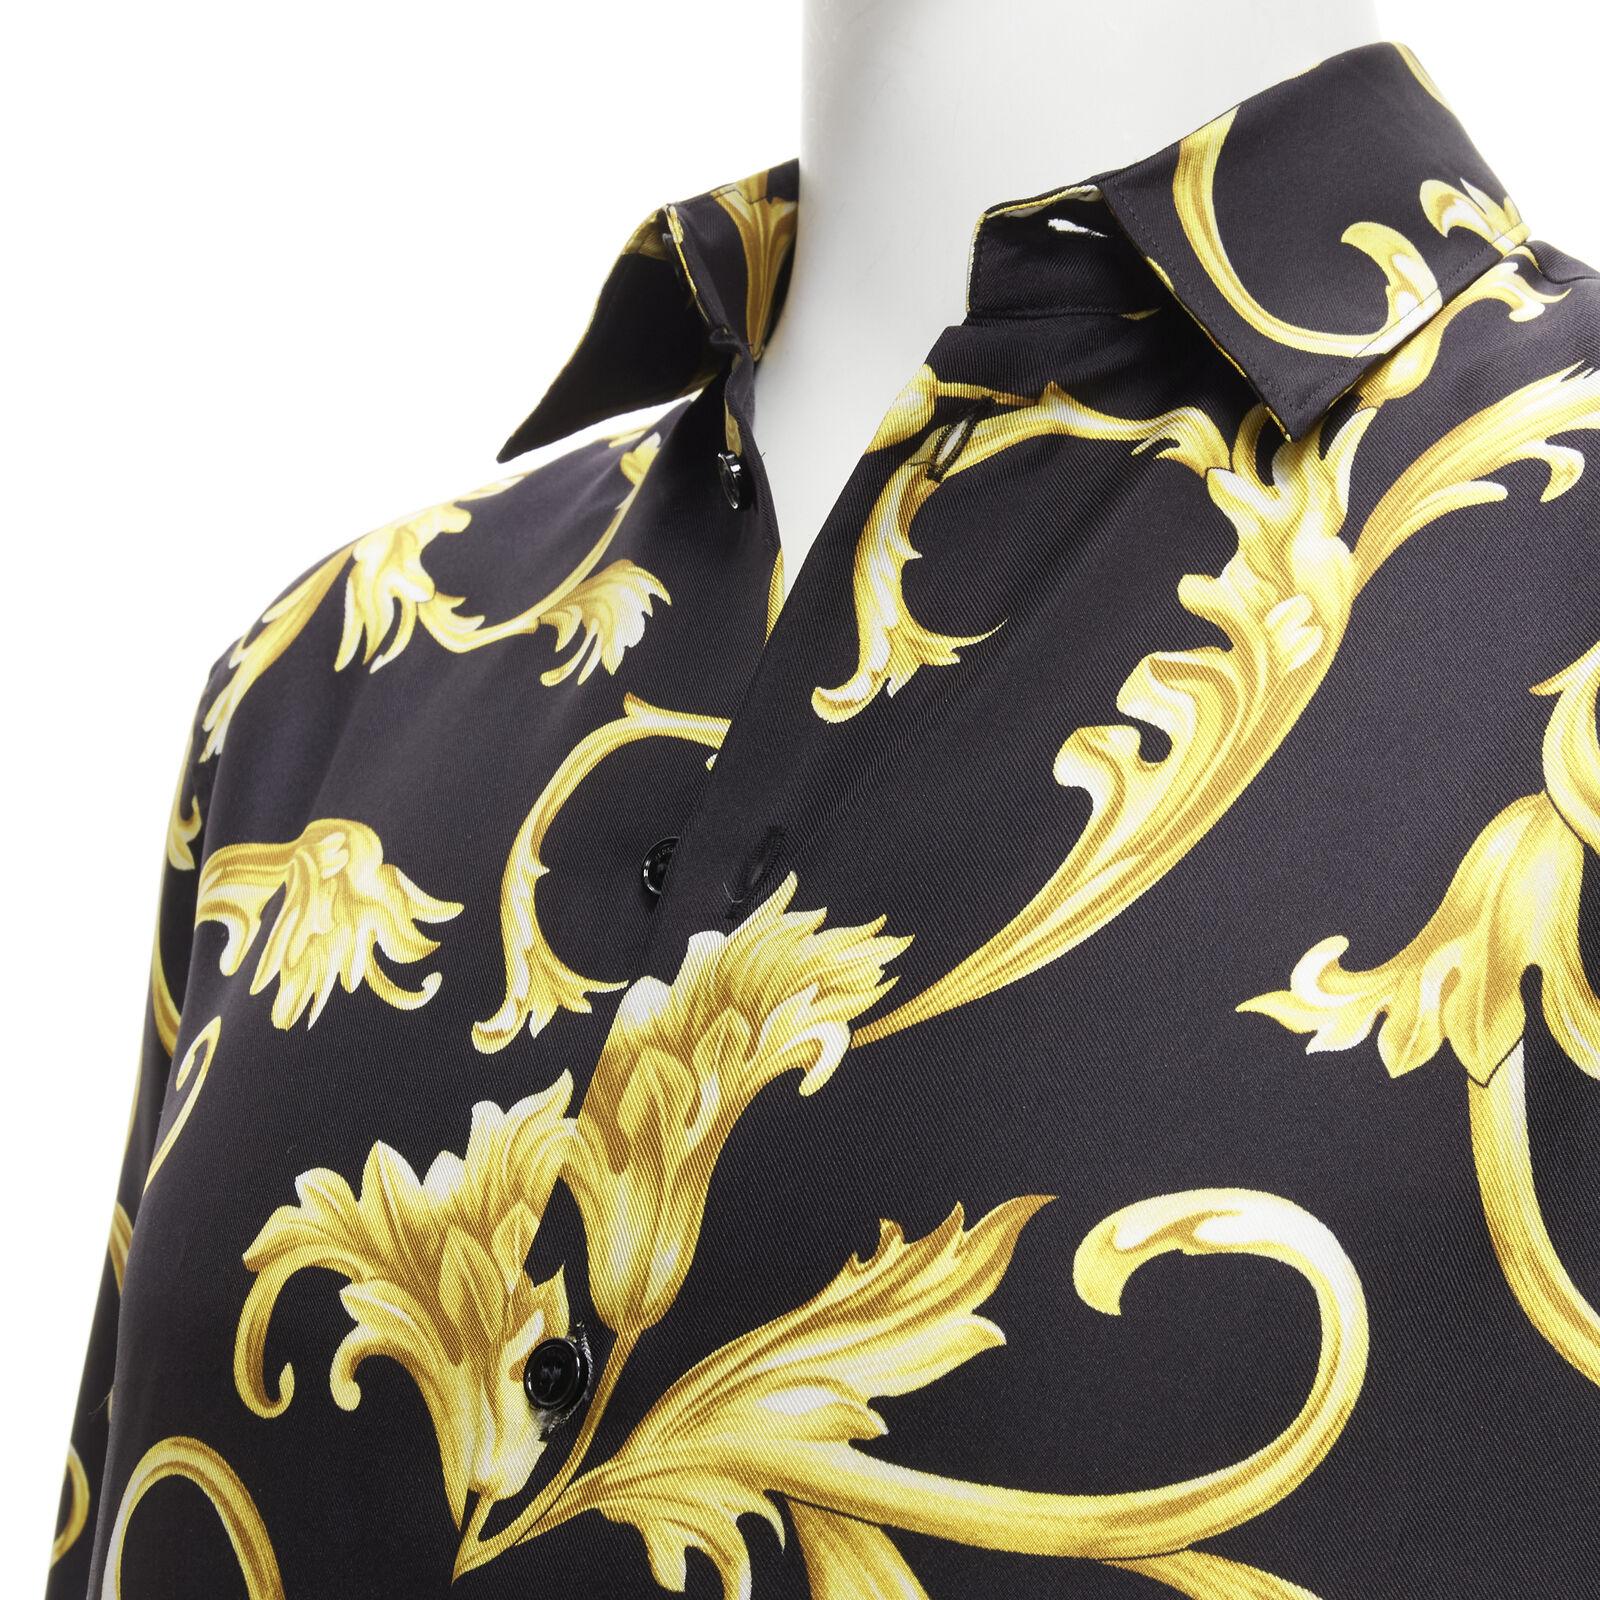 new VERSACE 100% silk black gold Barocco flora print relaxed shirt EU38 S
Reference: TGAS/C01469
Brand: Versace
Designer: Donatella Versace
Material: 100% Silk
Color: Black, Gold
Pattern: Floral
Closure: Button
Estimated Retail Price: USD 1200
Made